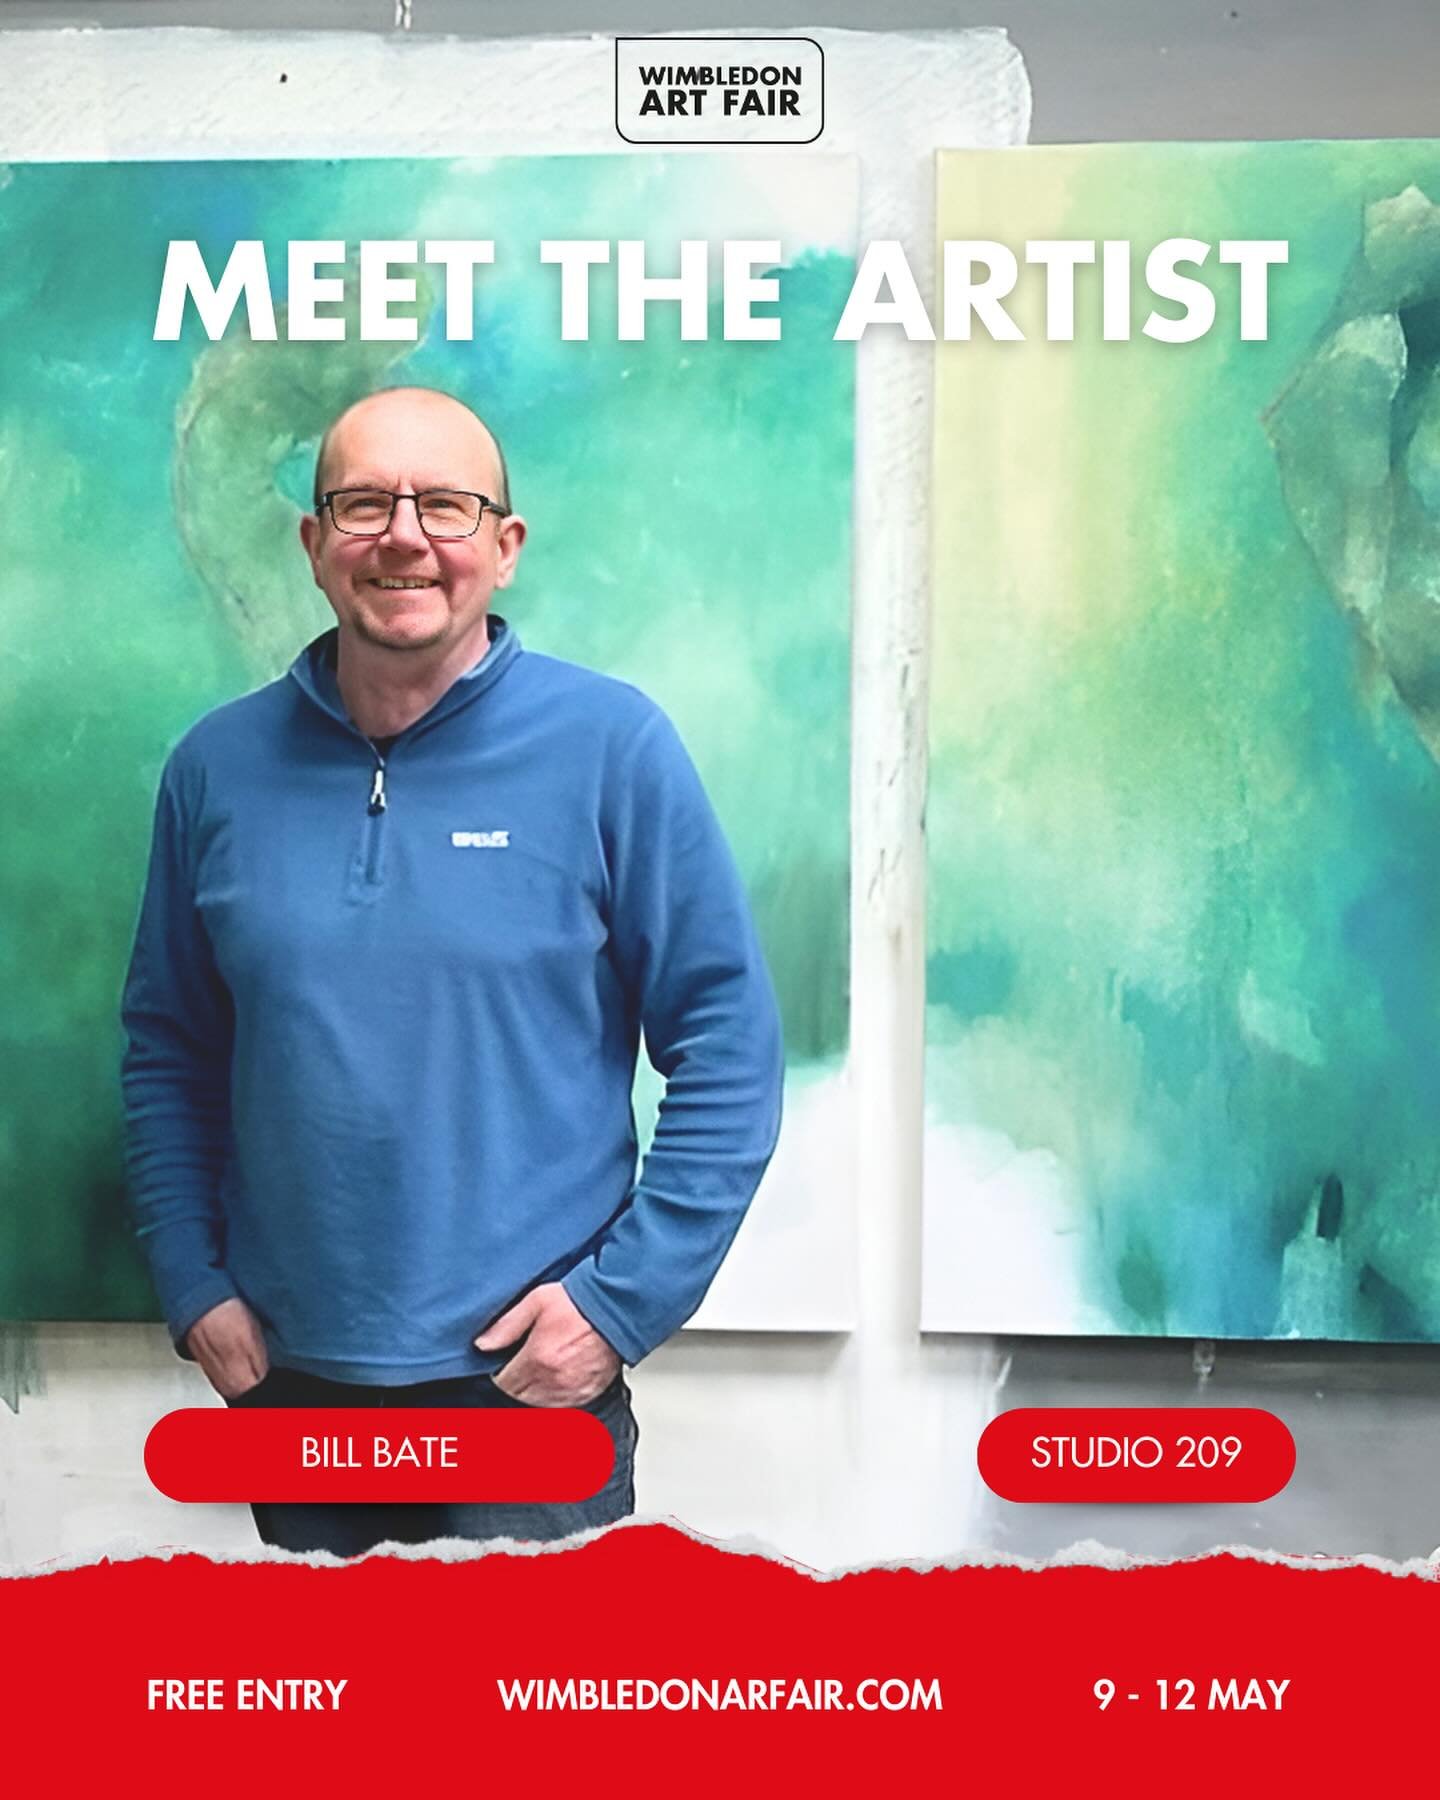 Meet Bill Bate | Studio 209 🔴

Step into the world of @bill.bate, where the human form comes alive in vibrant hues and emotive brushstrokes. 🖌️

Born in Liverpool in 1962 and a graduate in Fine Art from the Central School of Art and Design, Bill Ba